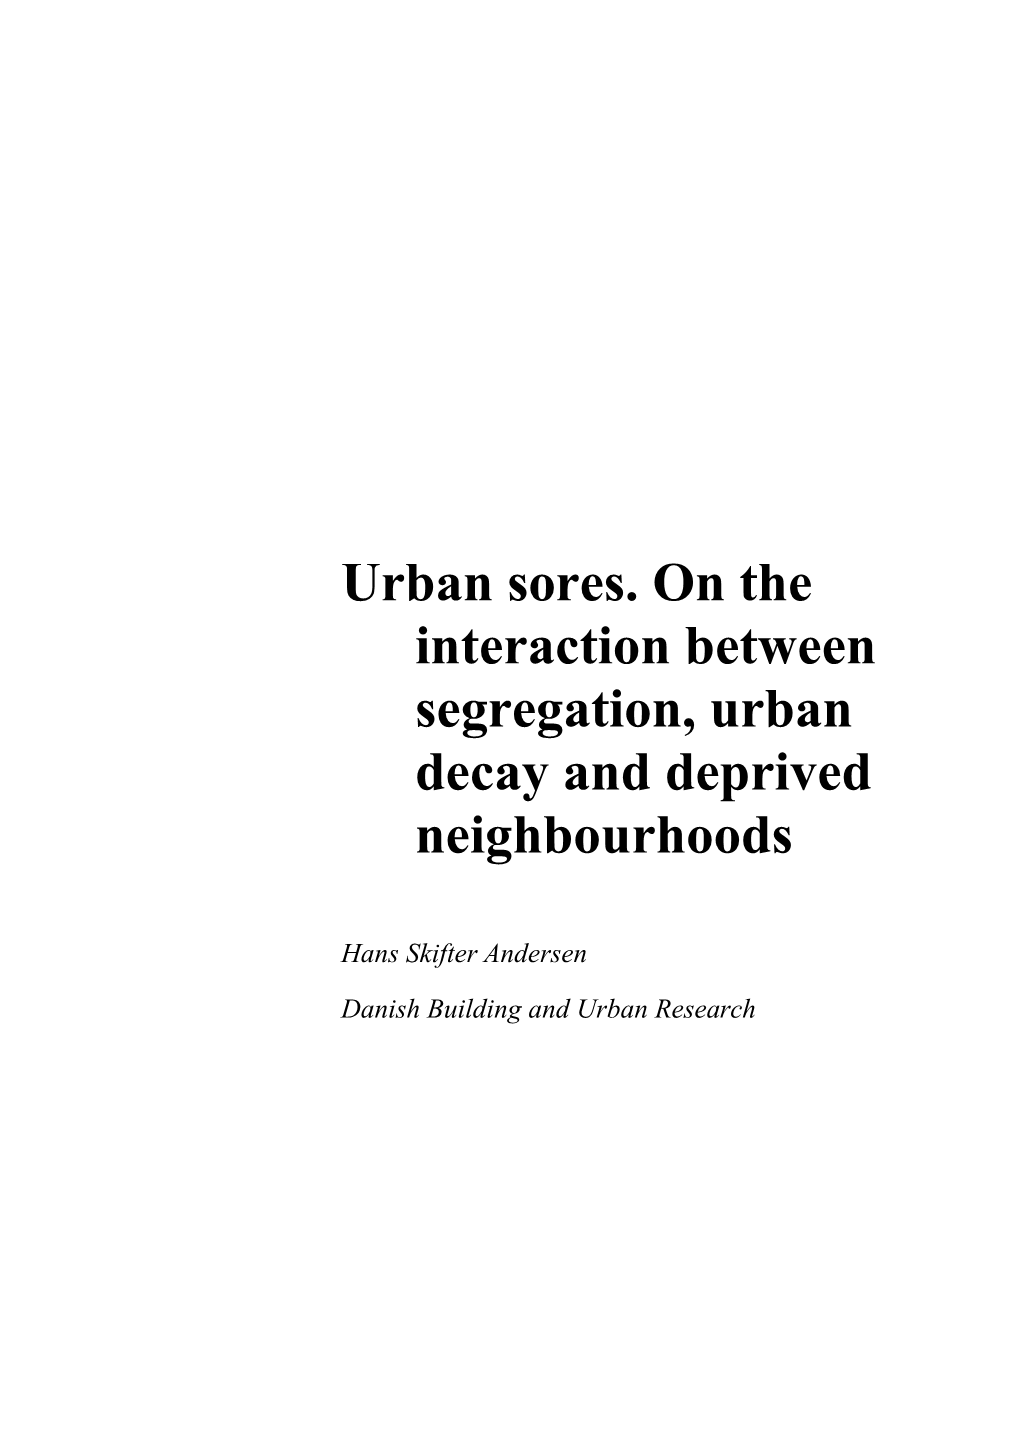 Urban Sores. on the Interaction Between Segregation, Urban Decay and Deprived Neighbourhoods